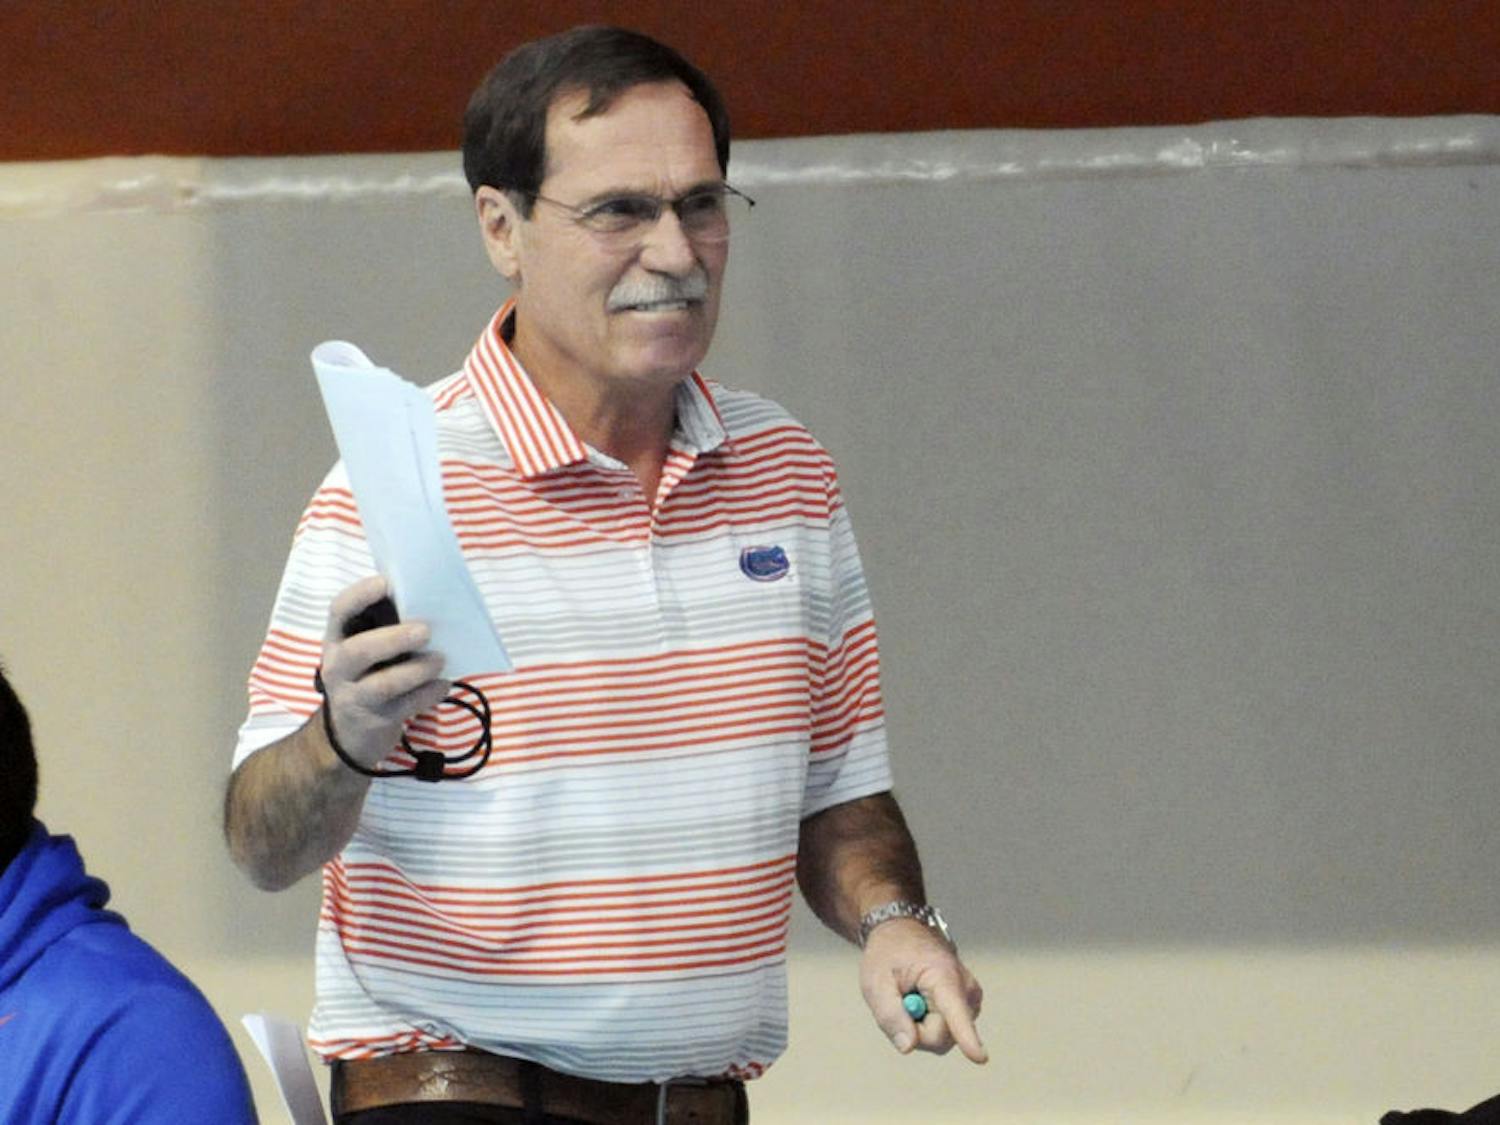 UF coach Gregg Troy encourages his swimmers during Florida’s meet against Auburn on Jan. 23, 2016, in the O’Connell Center.